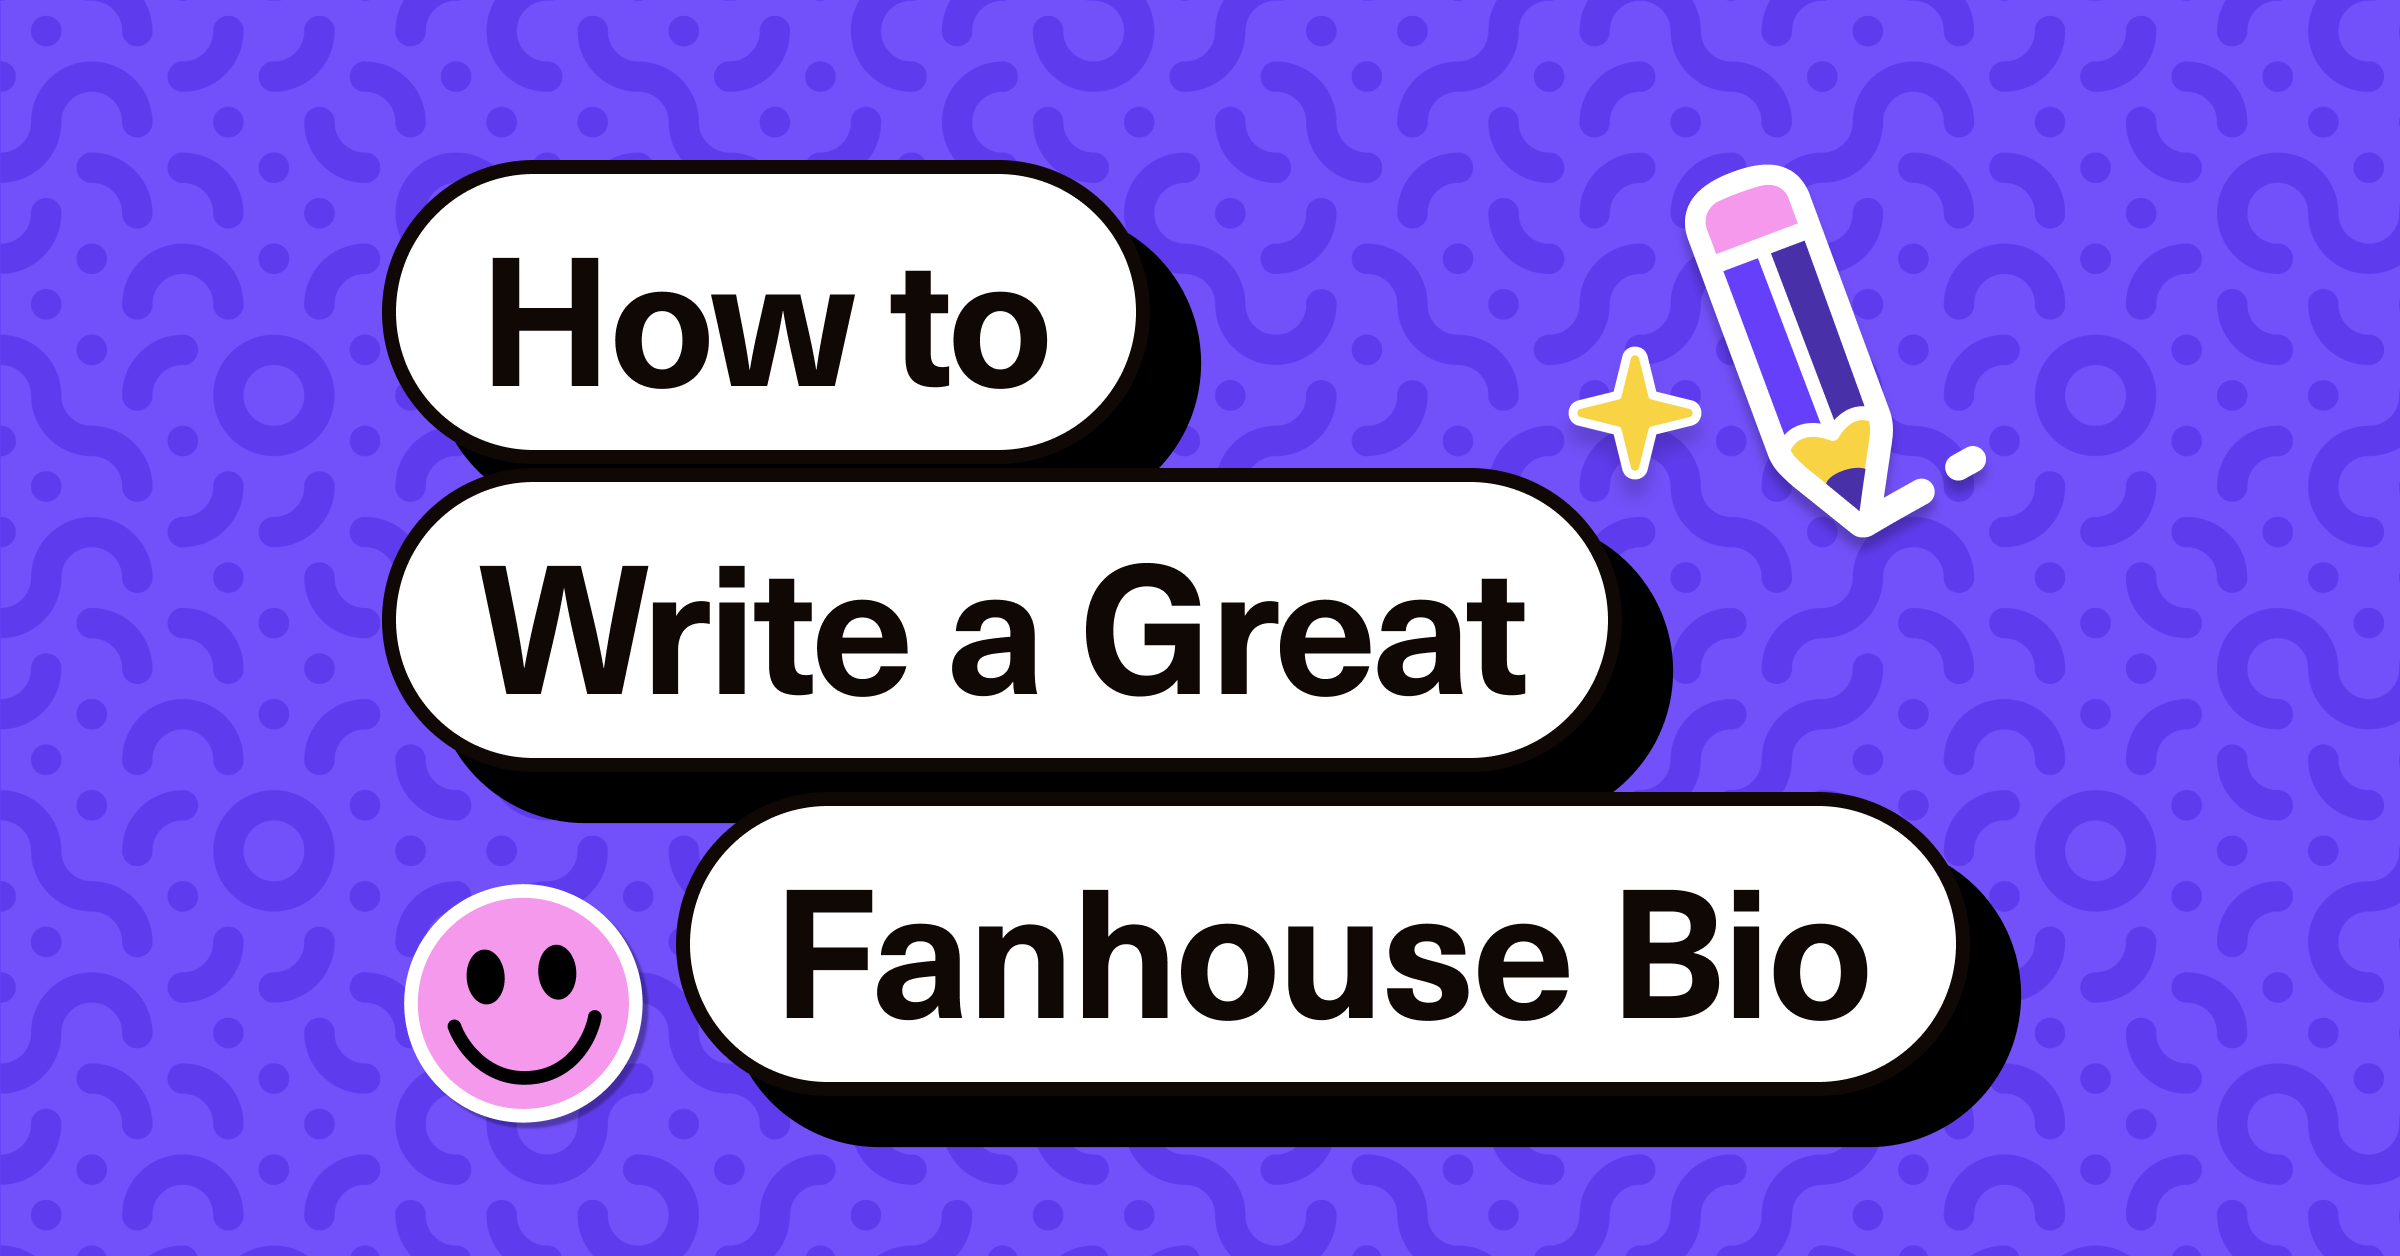 How to Write a Great Fanhouse Bio